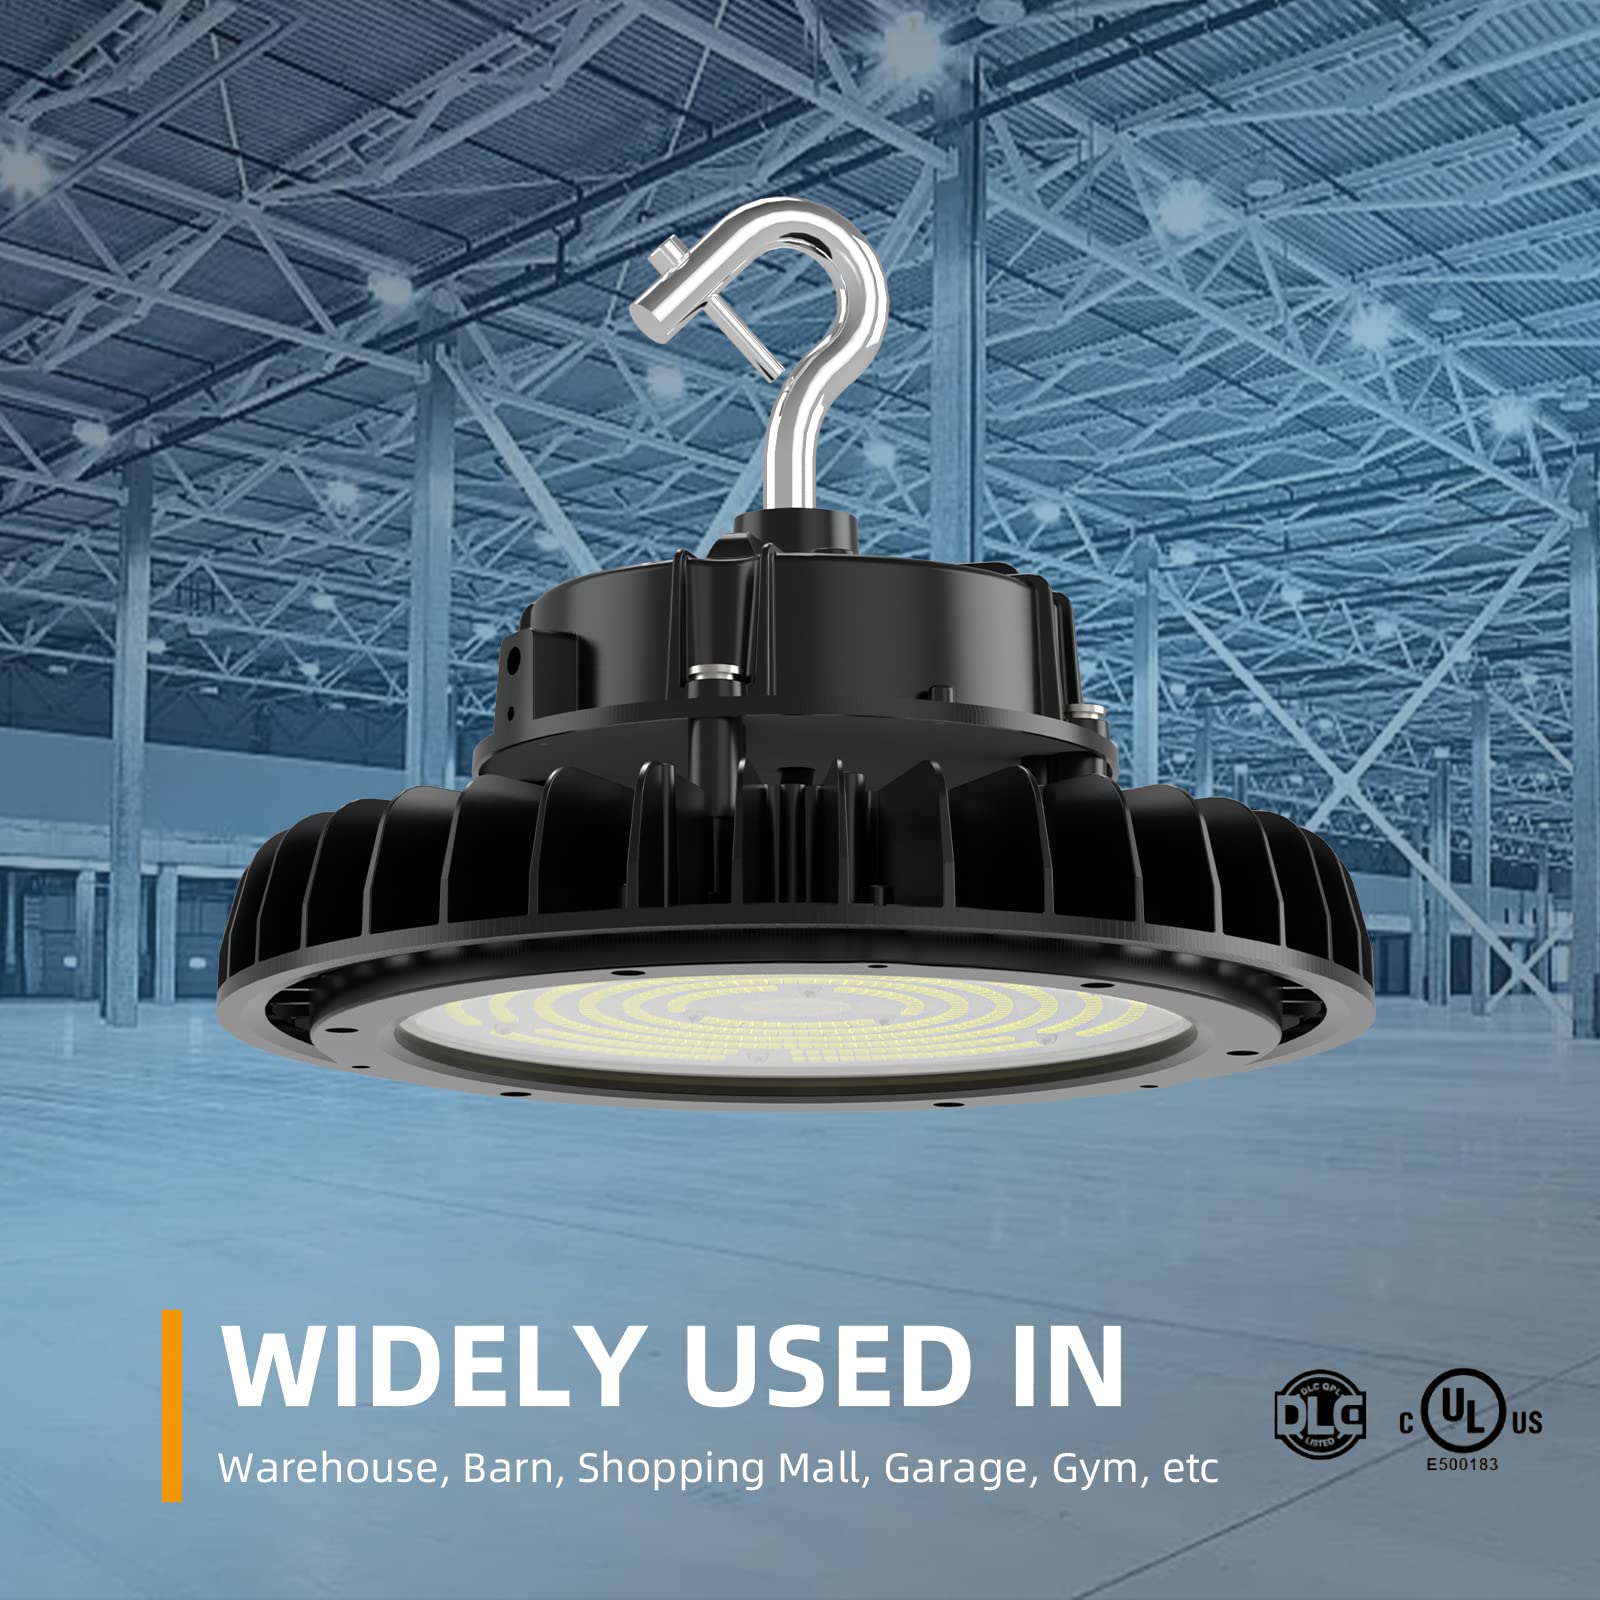 Adiding UFO LED High Bay Light 150W Bright 170LM/W DLC Listed 25,500LM 0-10V Dimmable Shop Light AC100-277V with 6.56ft US Plug Power Cable, Rotatable Bracket for Barn, Warehouse, Workshop, Storage